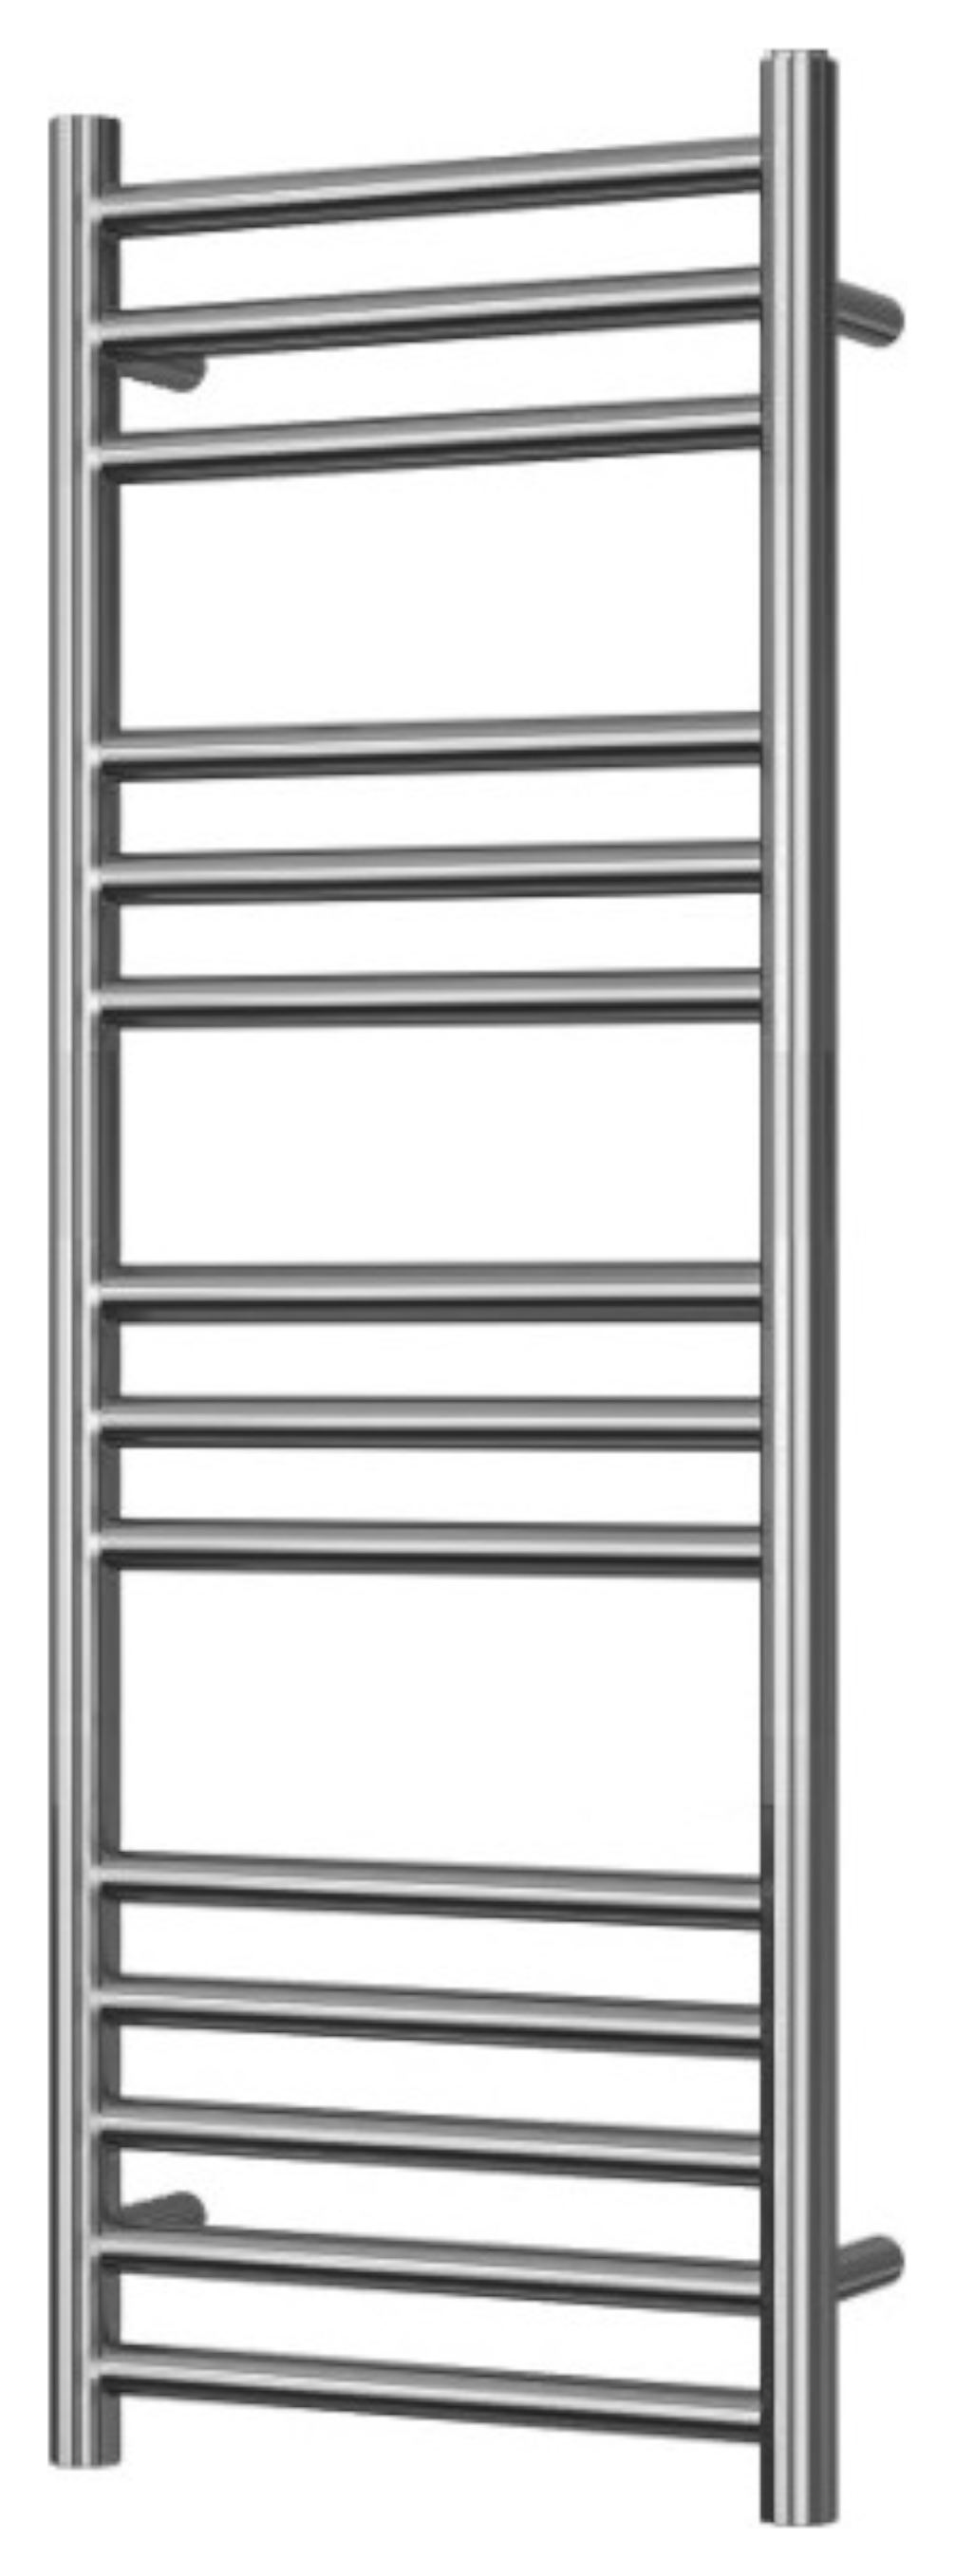 Image of Towelrads Eversley Polished Stainless Towel Radiator - 1000 x 400mm